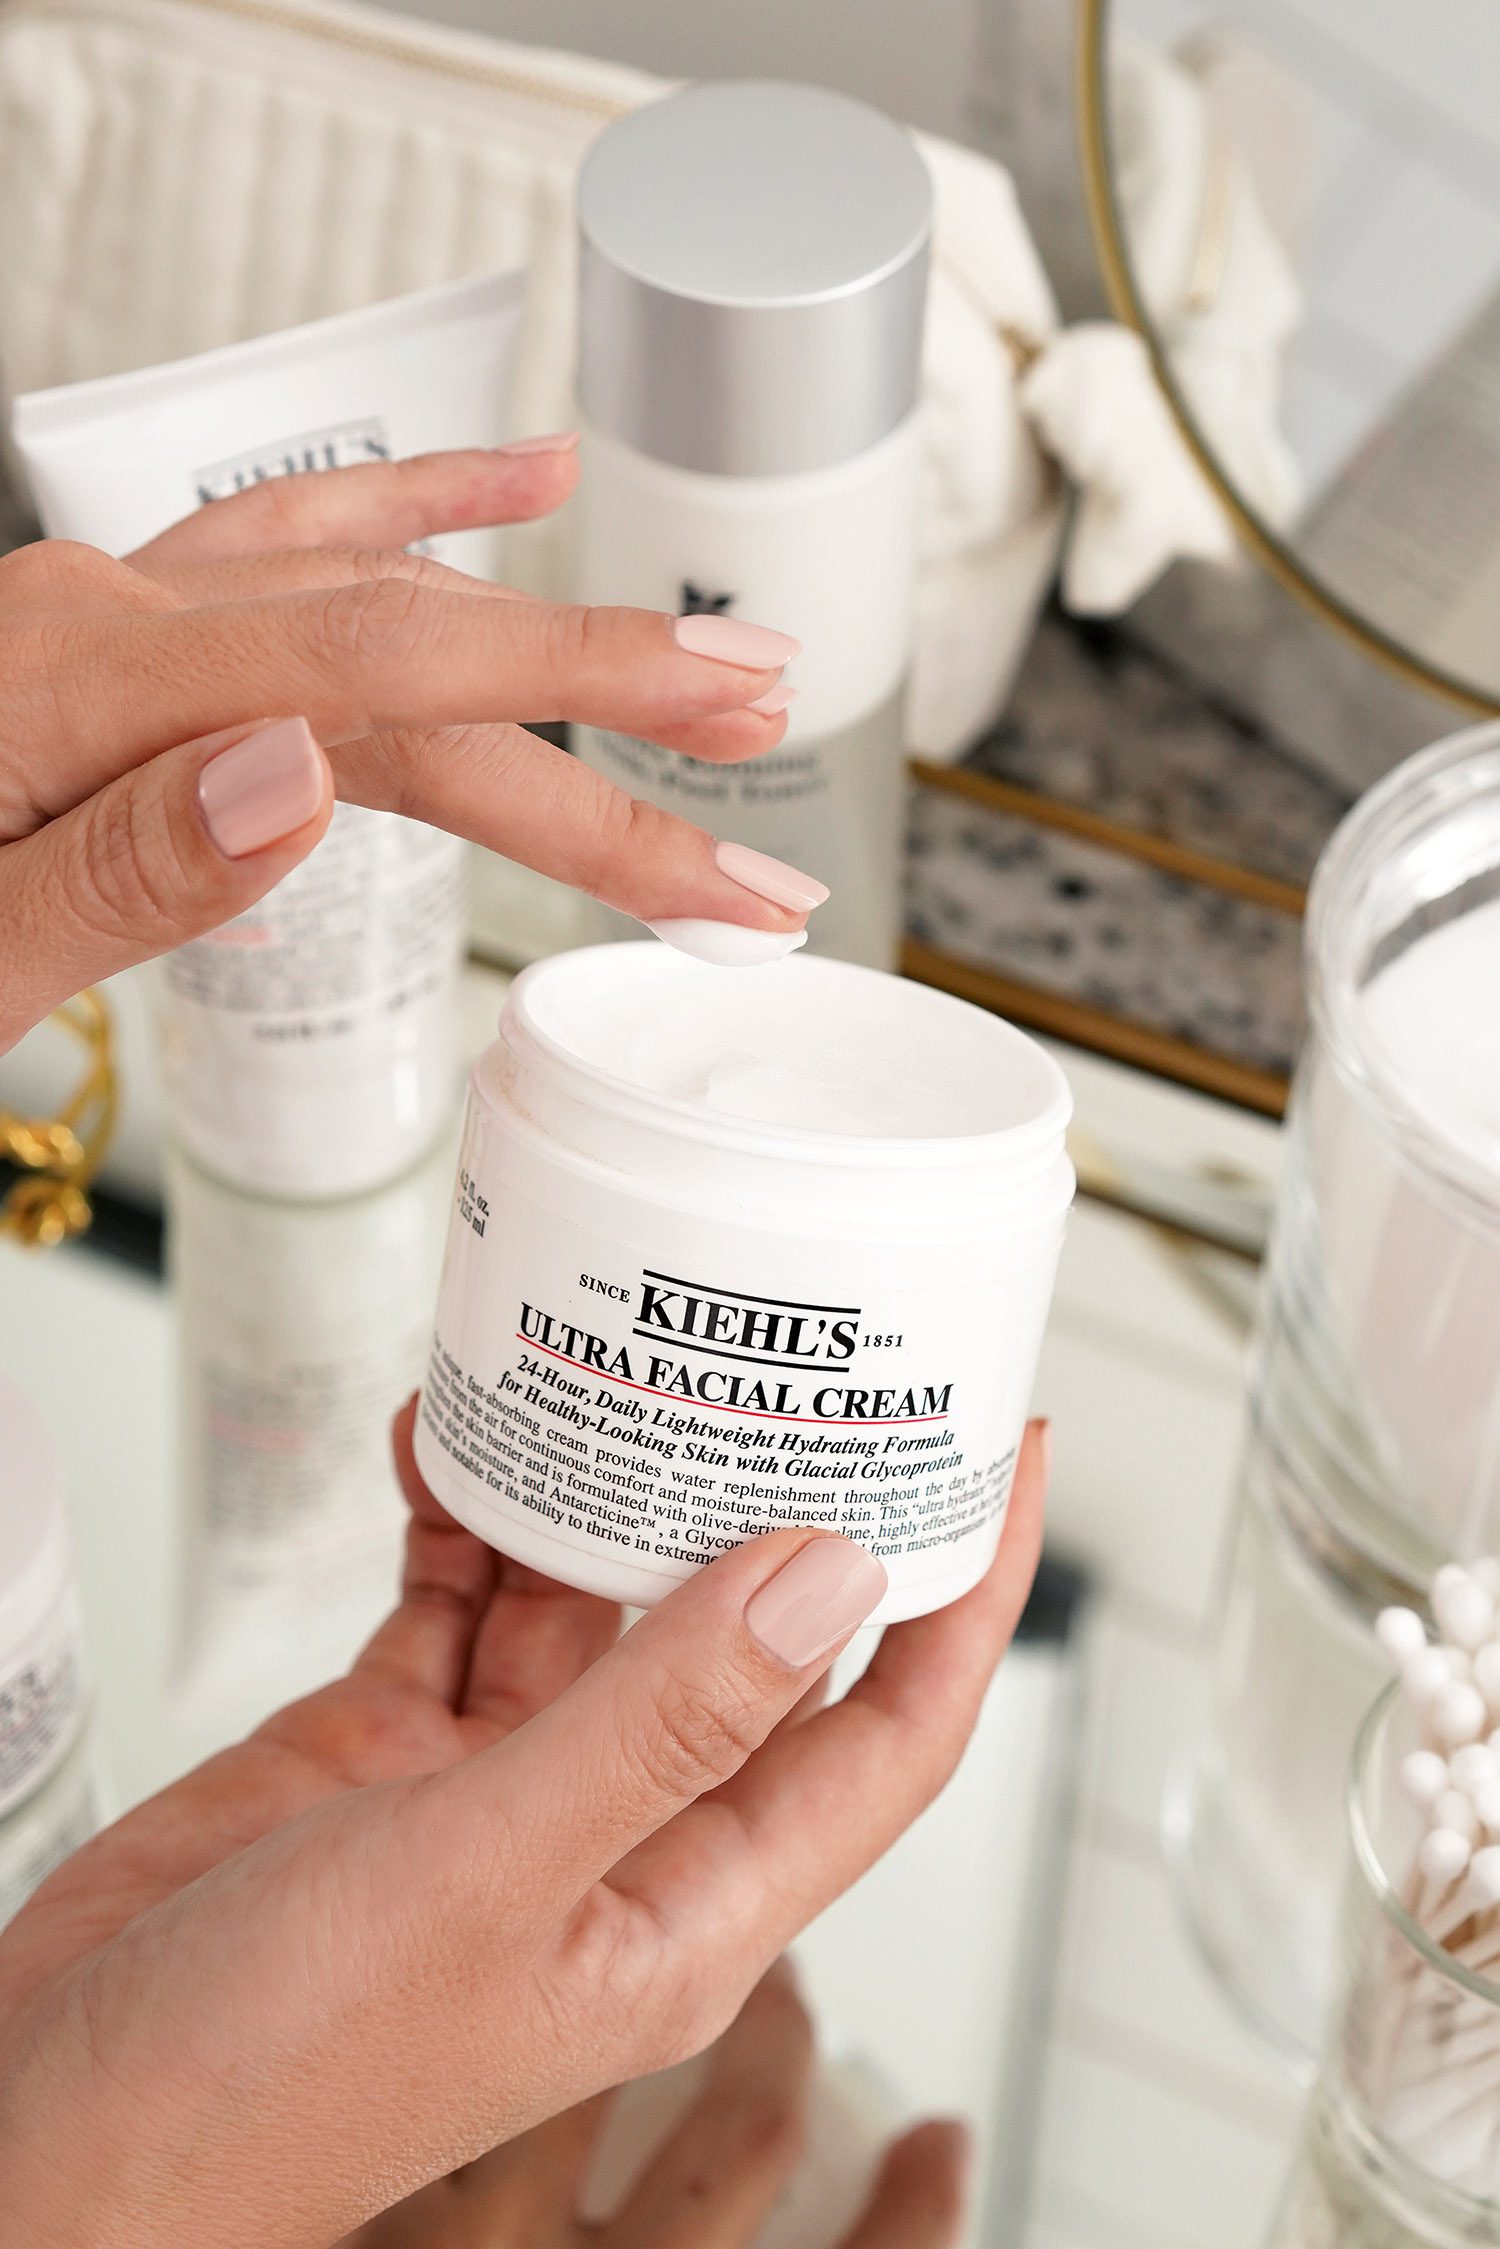 New Year Skincare Refresh Favorites from Kiehl's - The Beauty Look